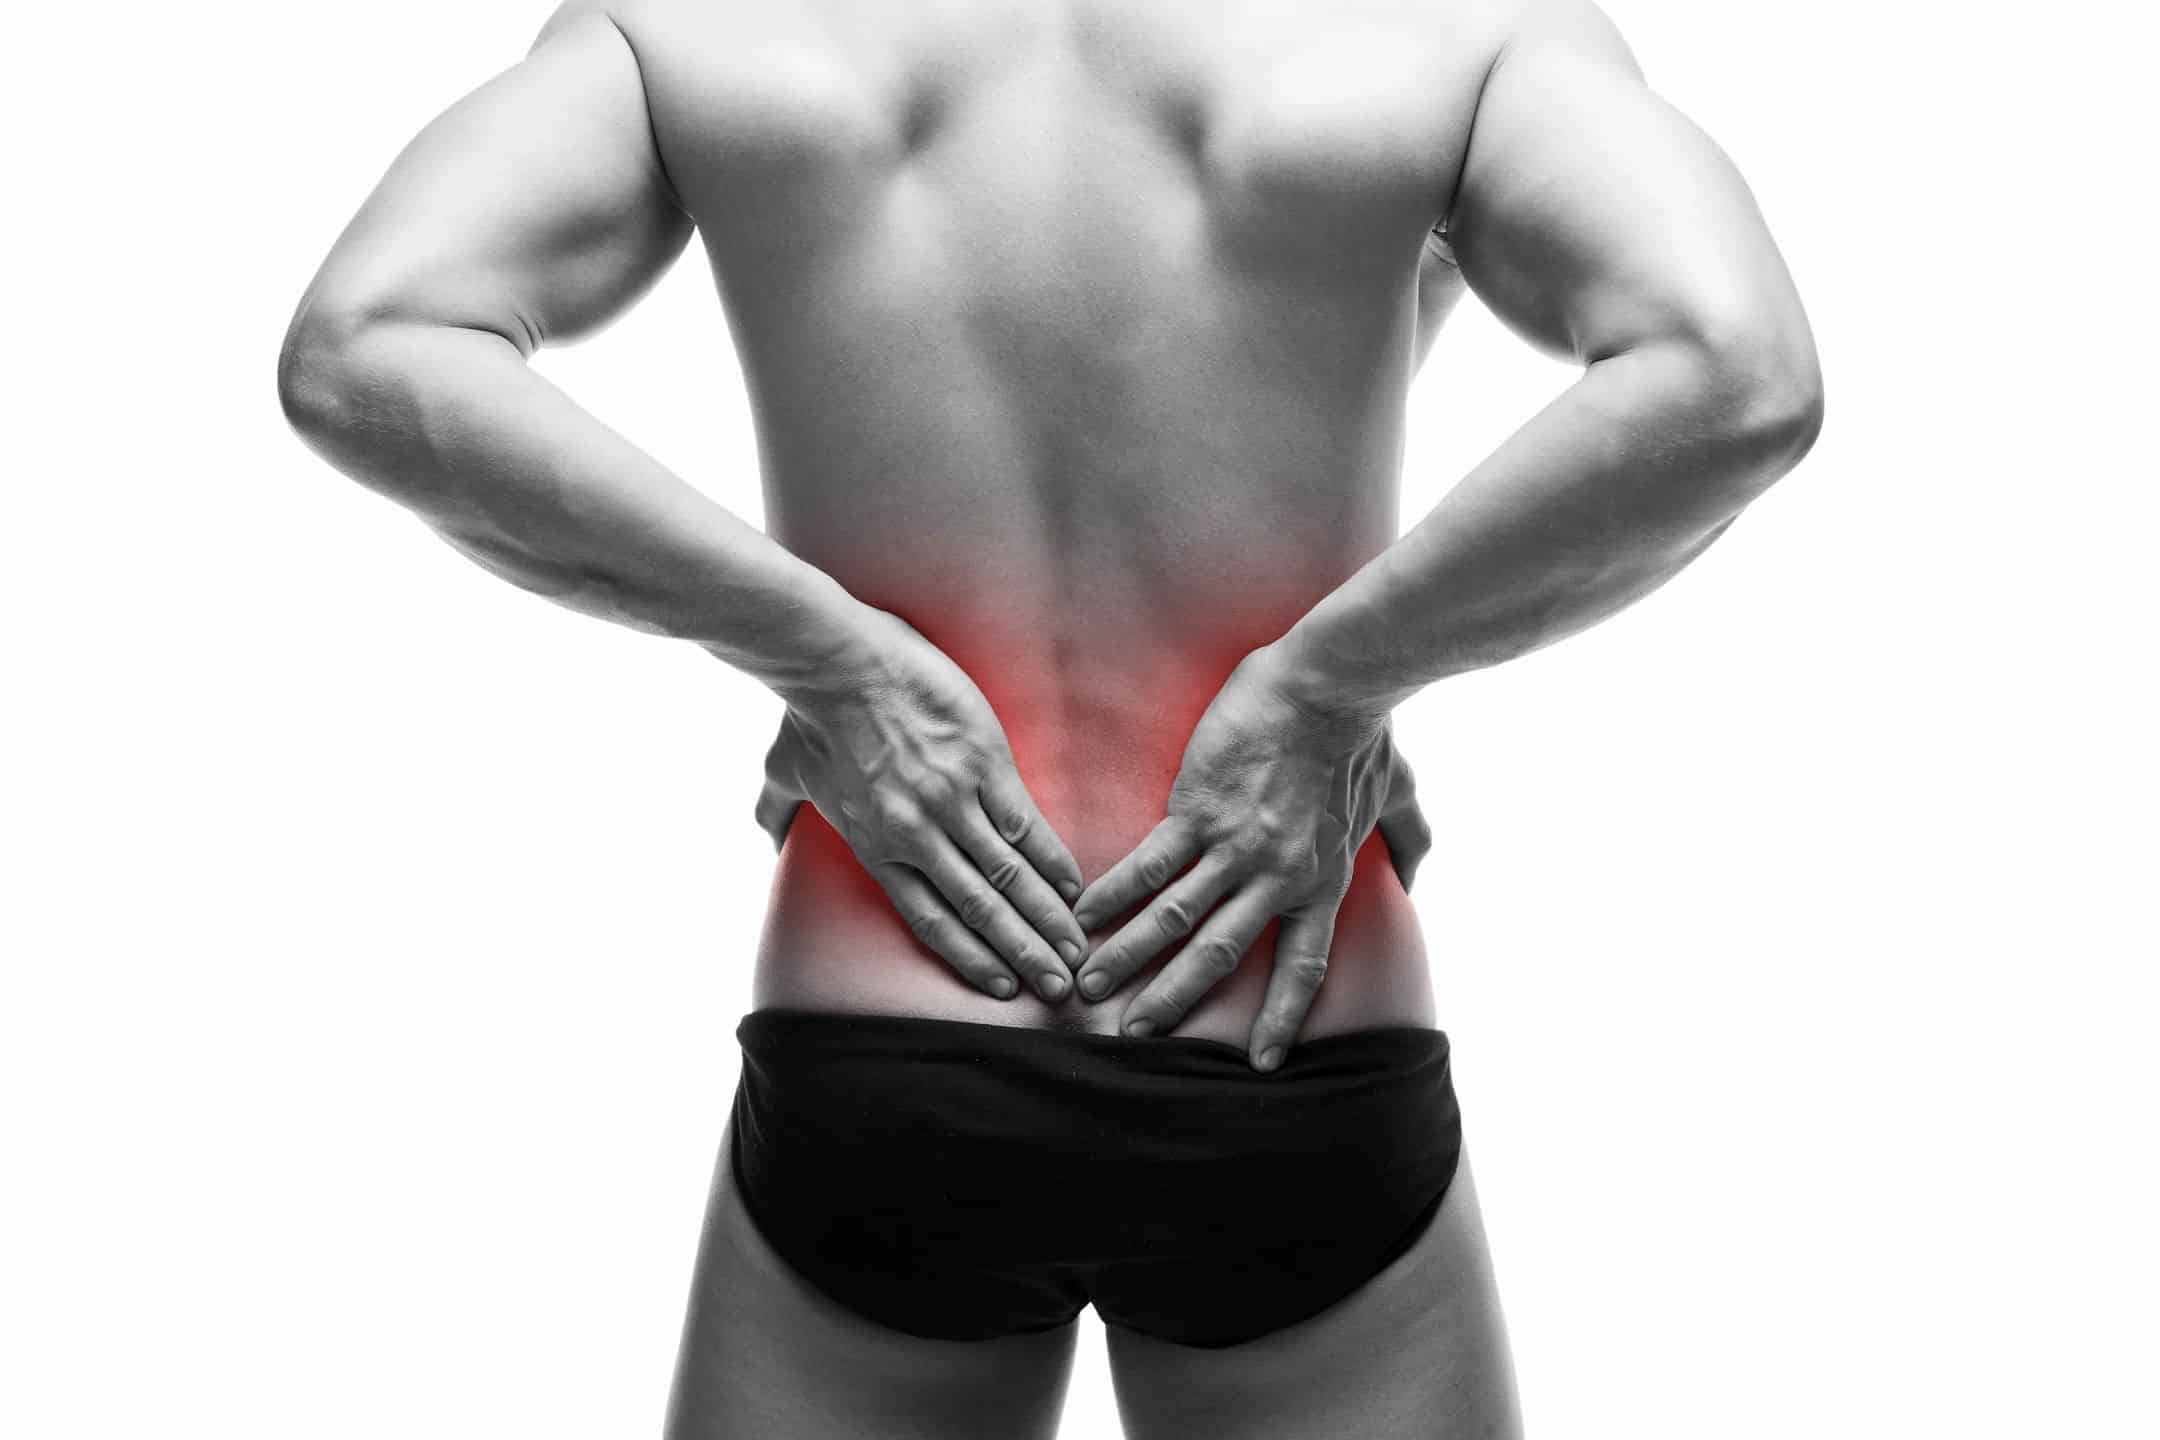 a man with his back to the camera puts his hands on a stylized red region of his lower back indicating he is in pain in that area